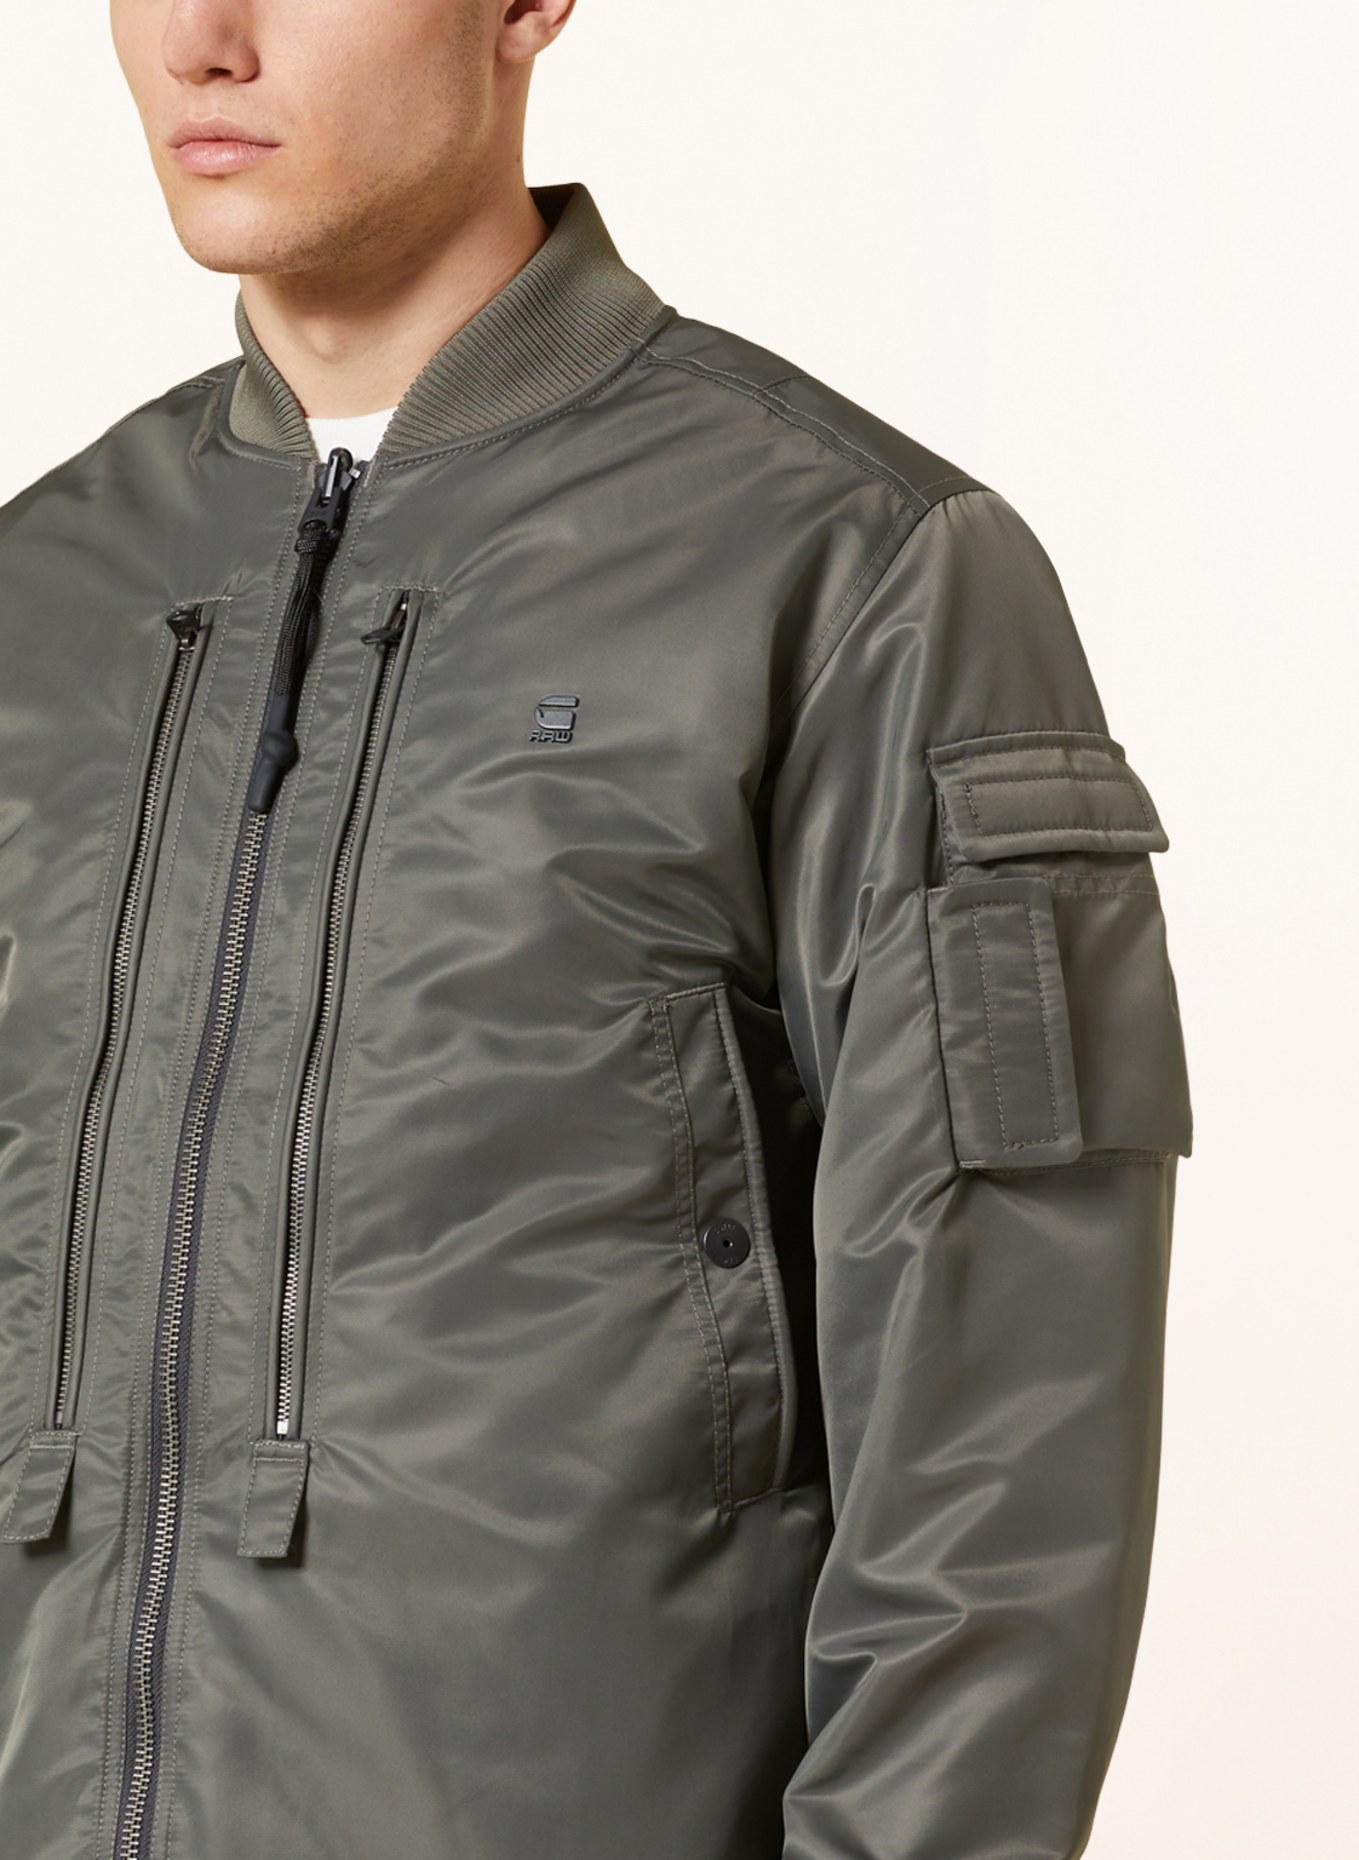 G-Star RAW Reversible bomber jacket DECK, Color: GRAY (Image 5)